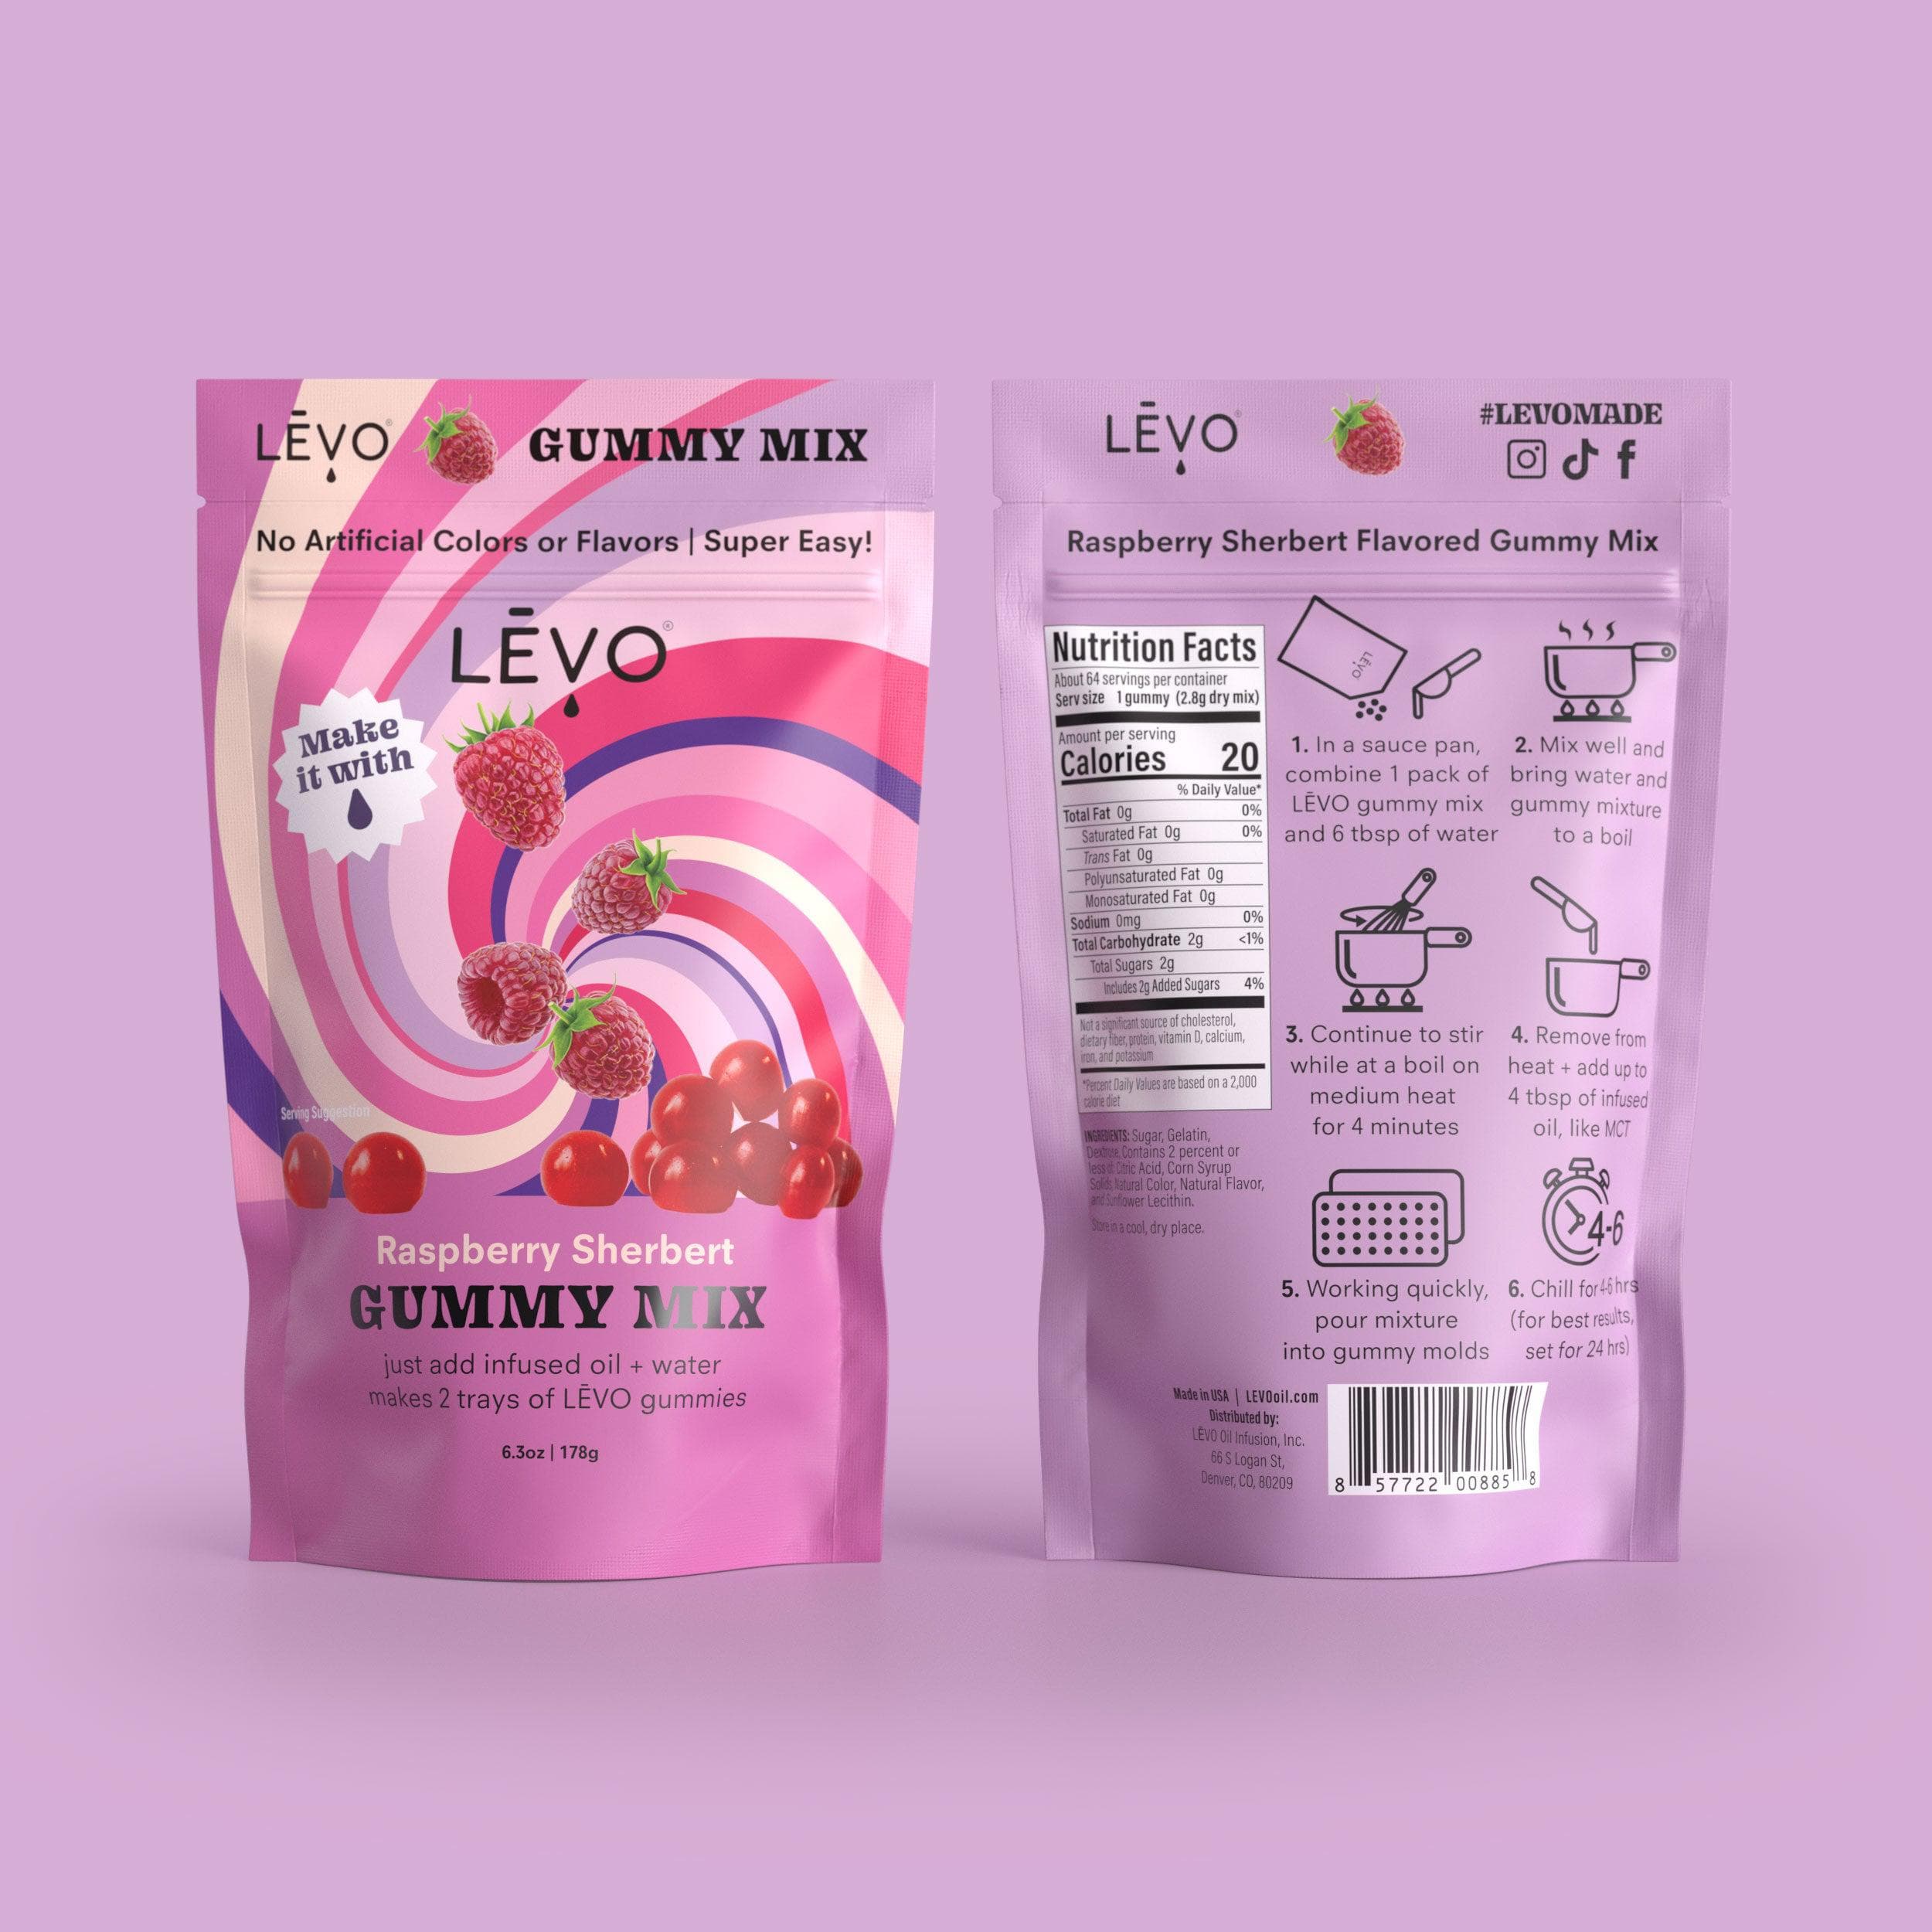 Looking to make edible and shareable snacks at home? Want to make gummies that will help you relax? Try LEVO Rasberry Sherbert Gummy Mix and follow the directions printed on the bag.